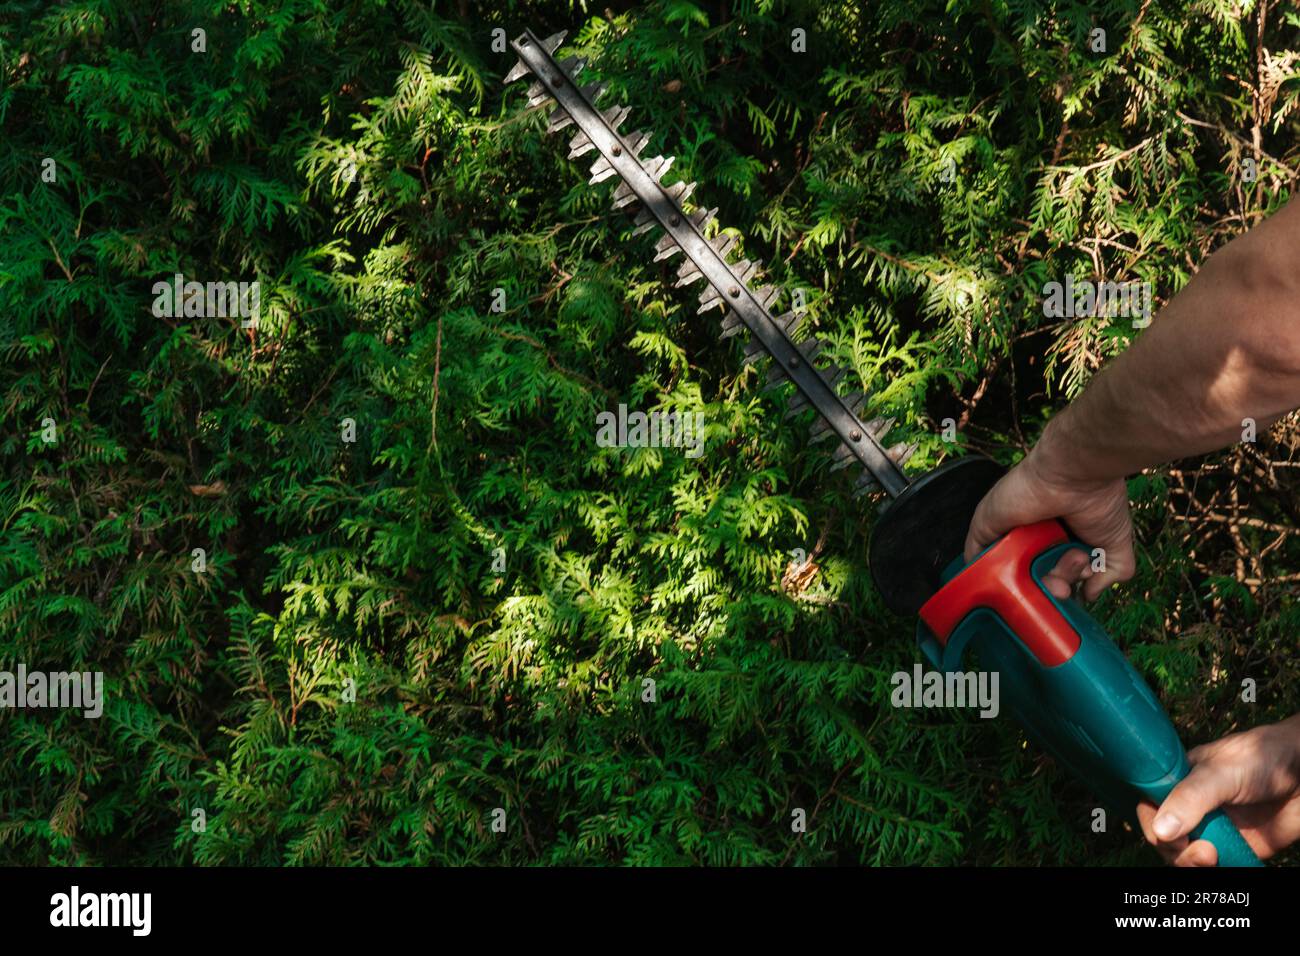 hedge formation.Brush cutter in hands on thuja brabant background in a sunny summer green garden.Garden tools and accessories.Plant pruning.Gardening Stock Photo